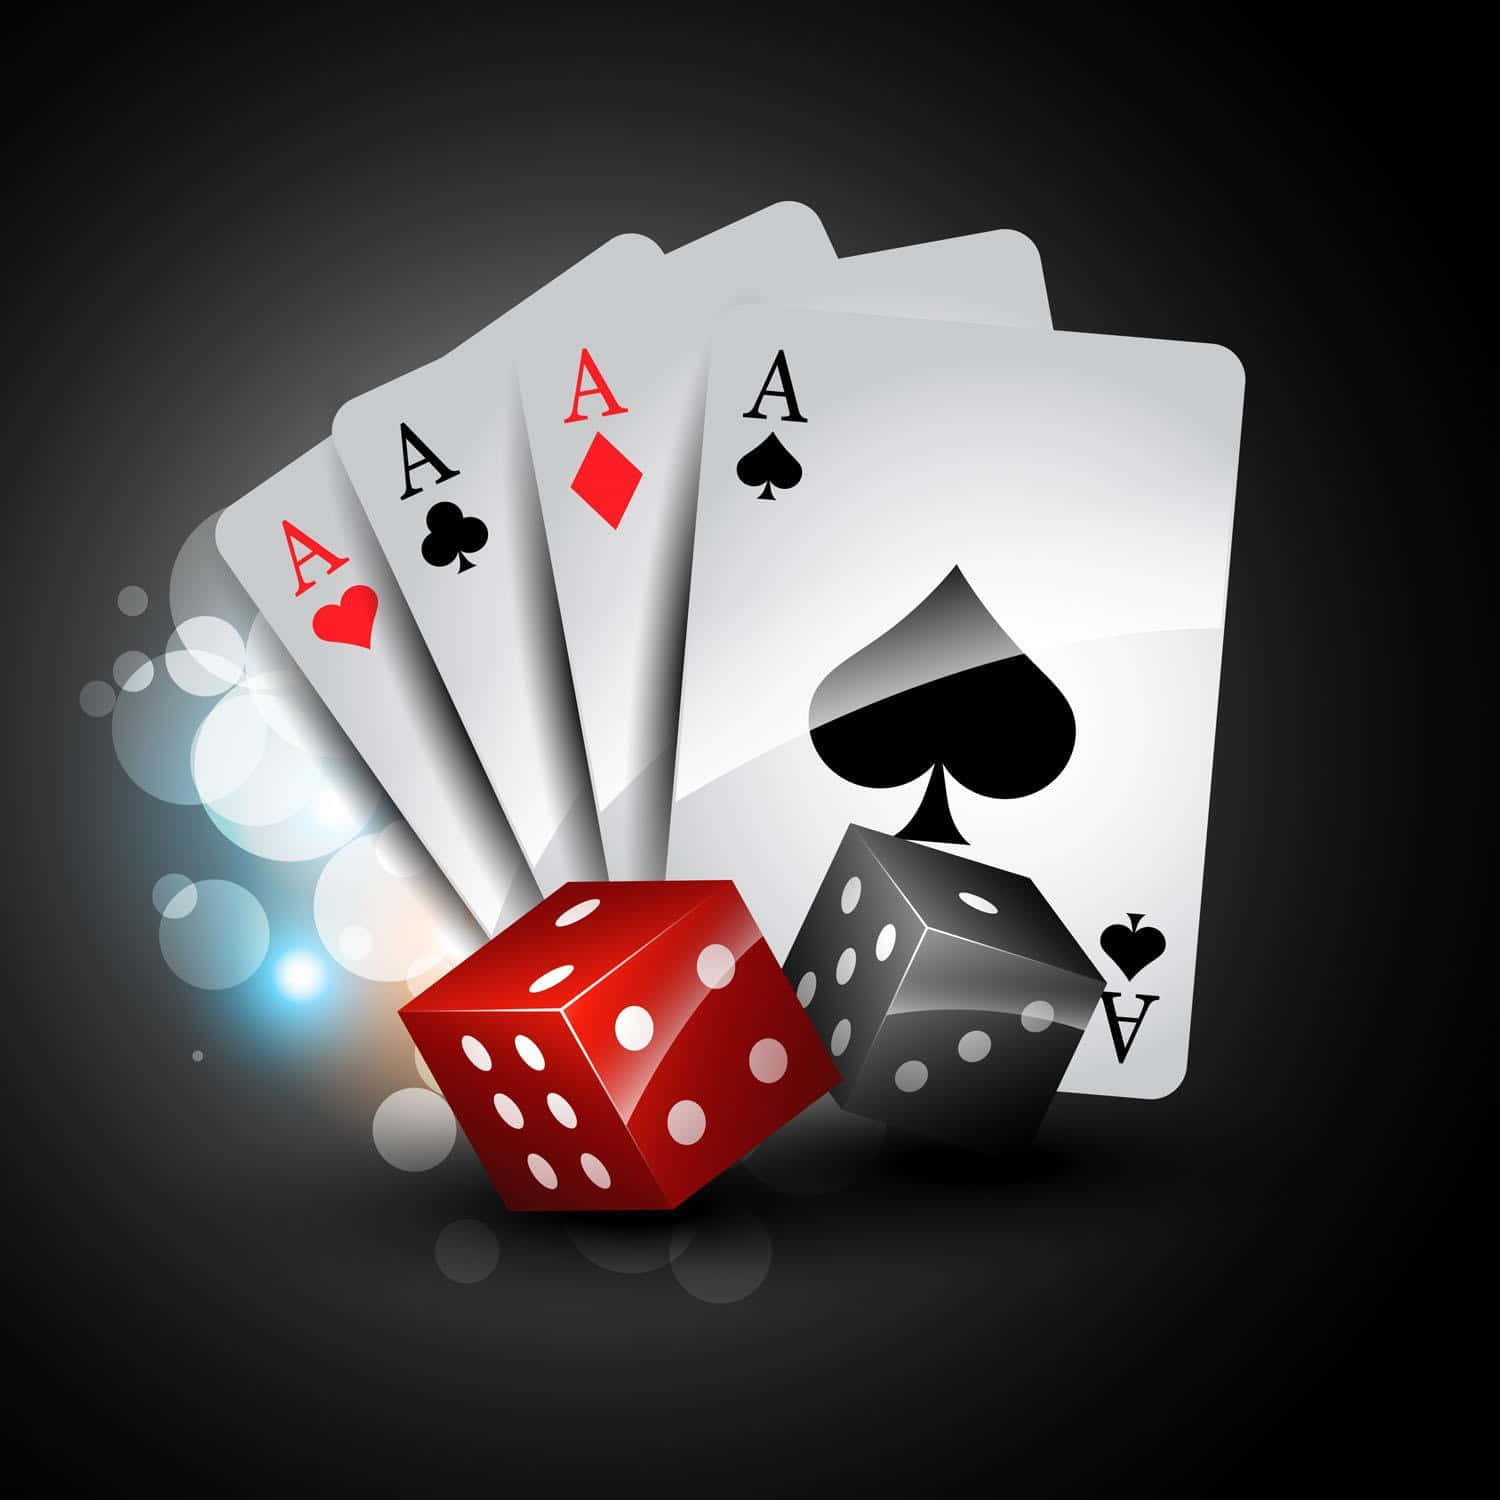 A Poker Card And Dice On A Black Background